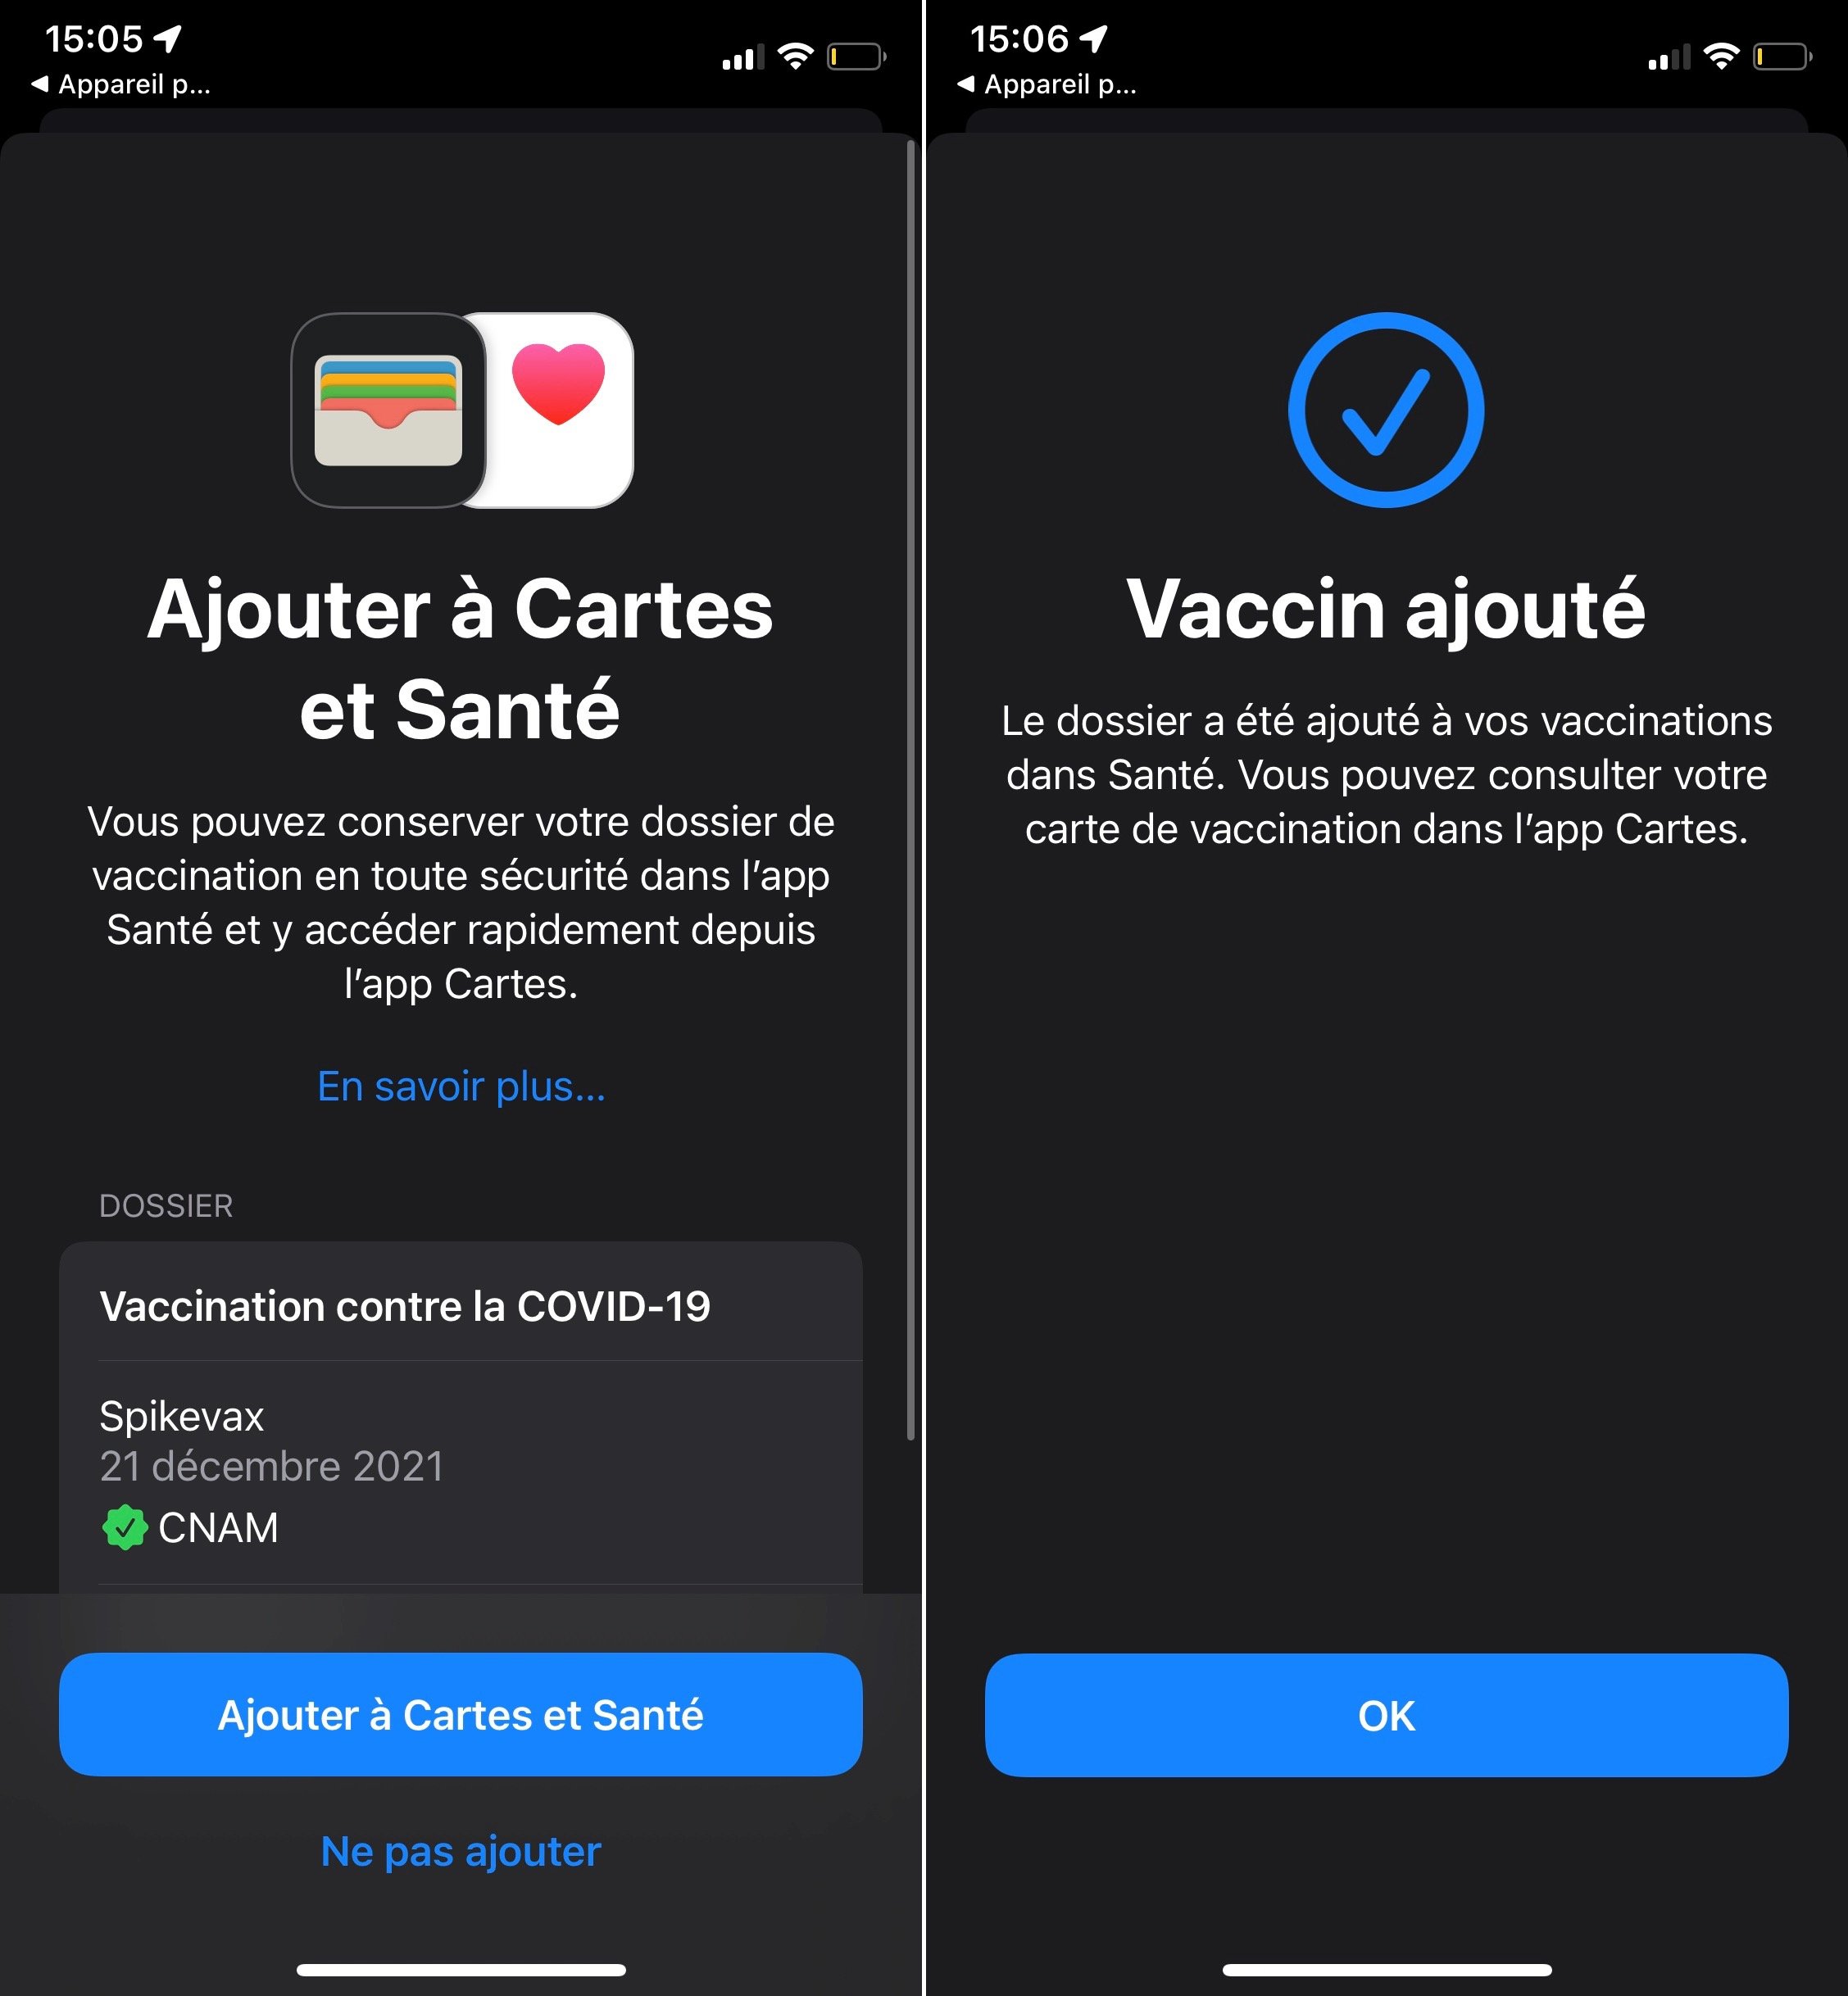 How to add your vaccination pass in Wallet (Apple Cards)